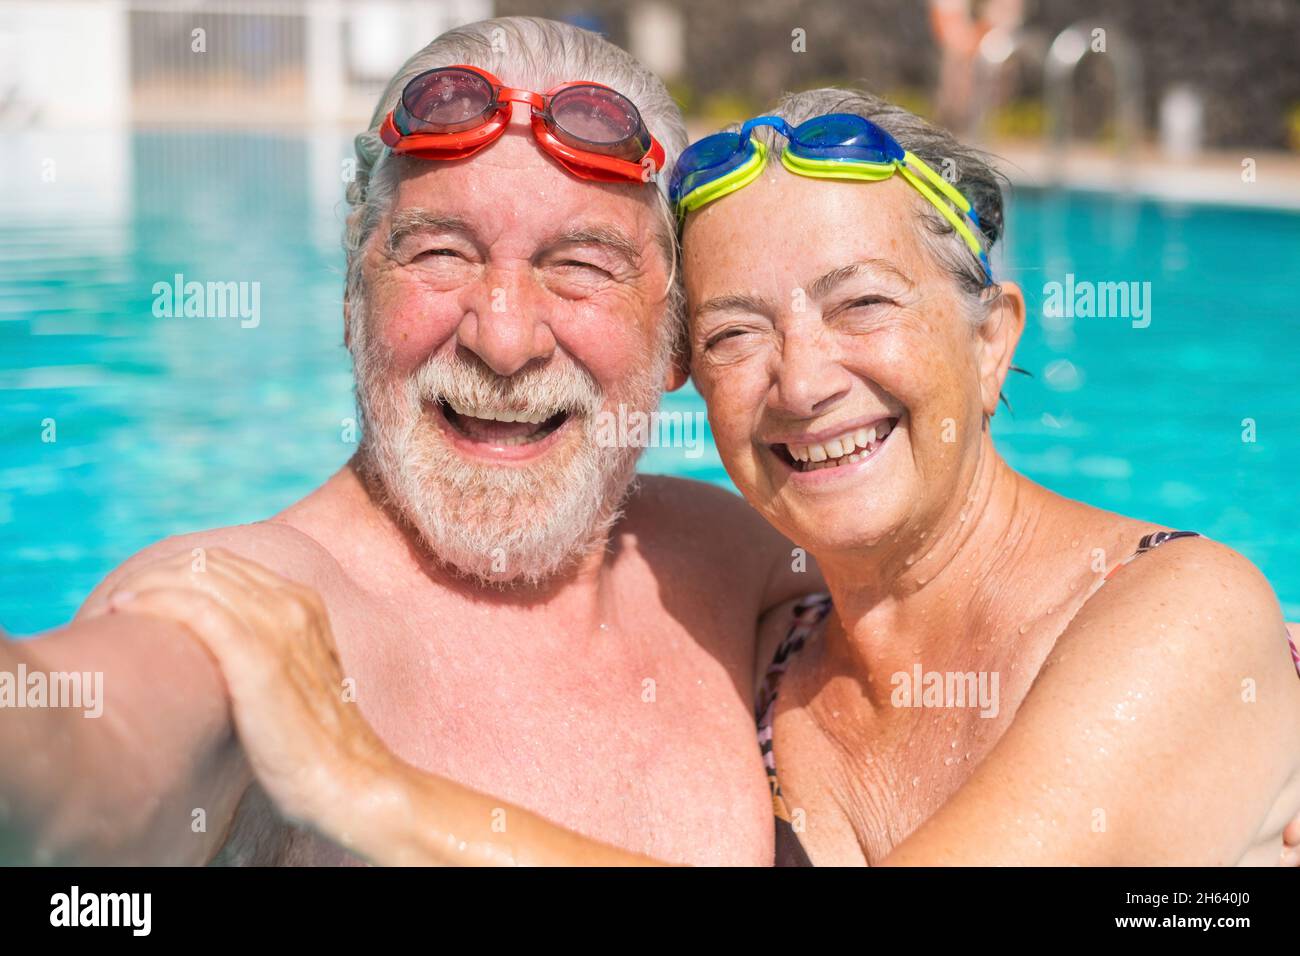 couple of two happy seniors having fun and enjoying together in the swimming pool taking a selfie picture smiling and looking at the camera. happy people enjoying summer outdoor in the water Stock Photo